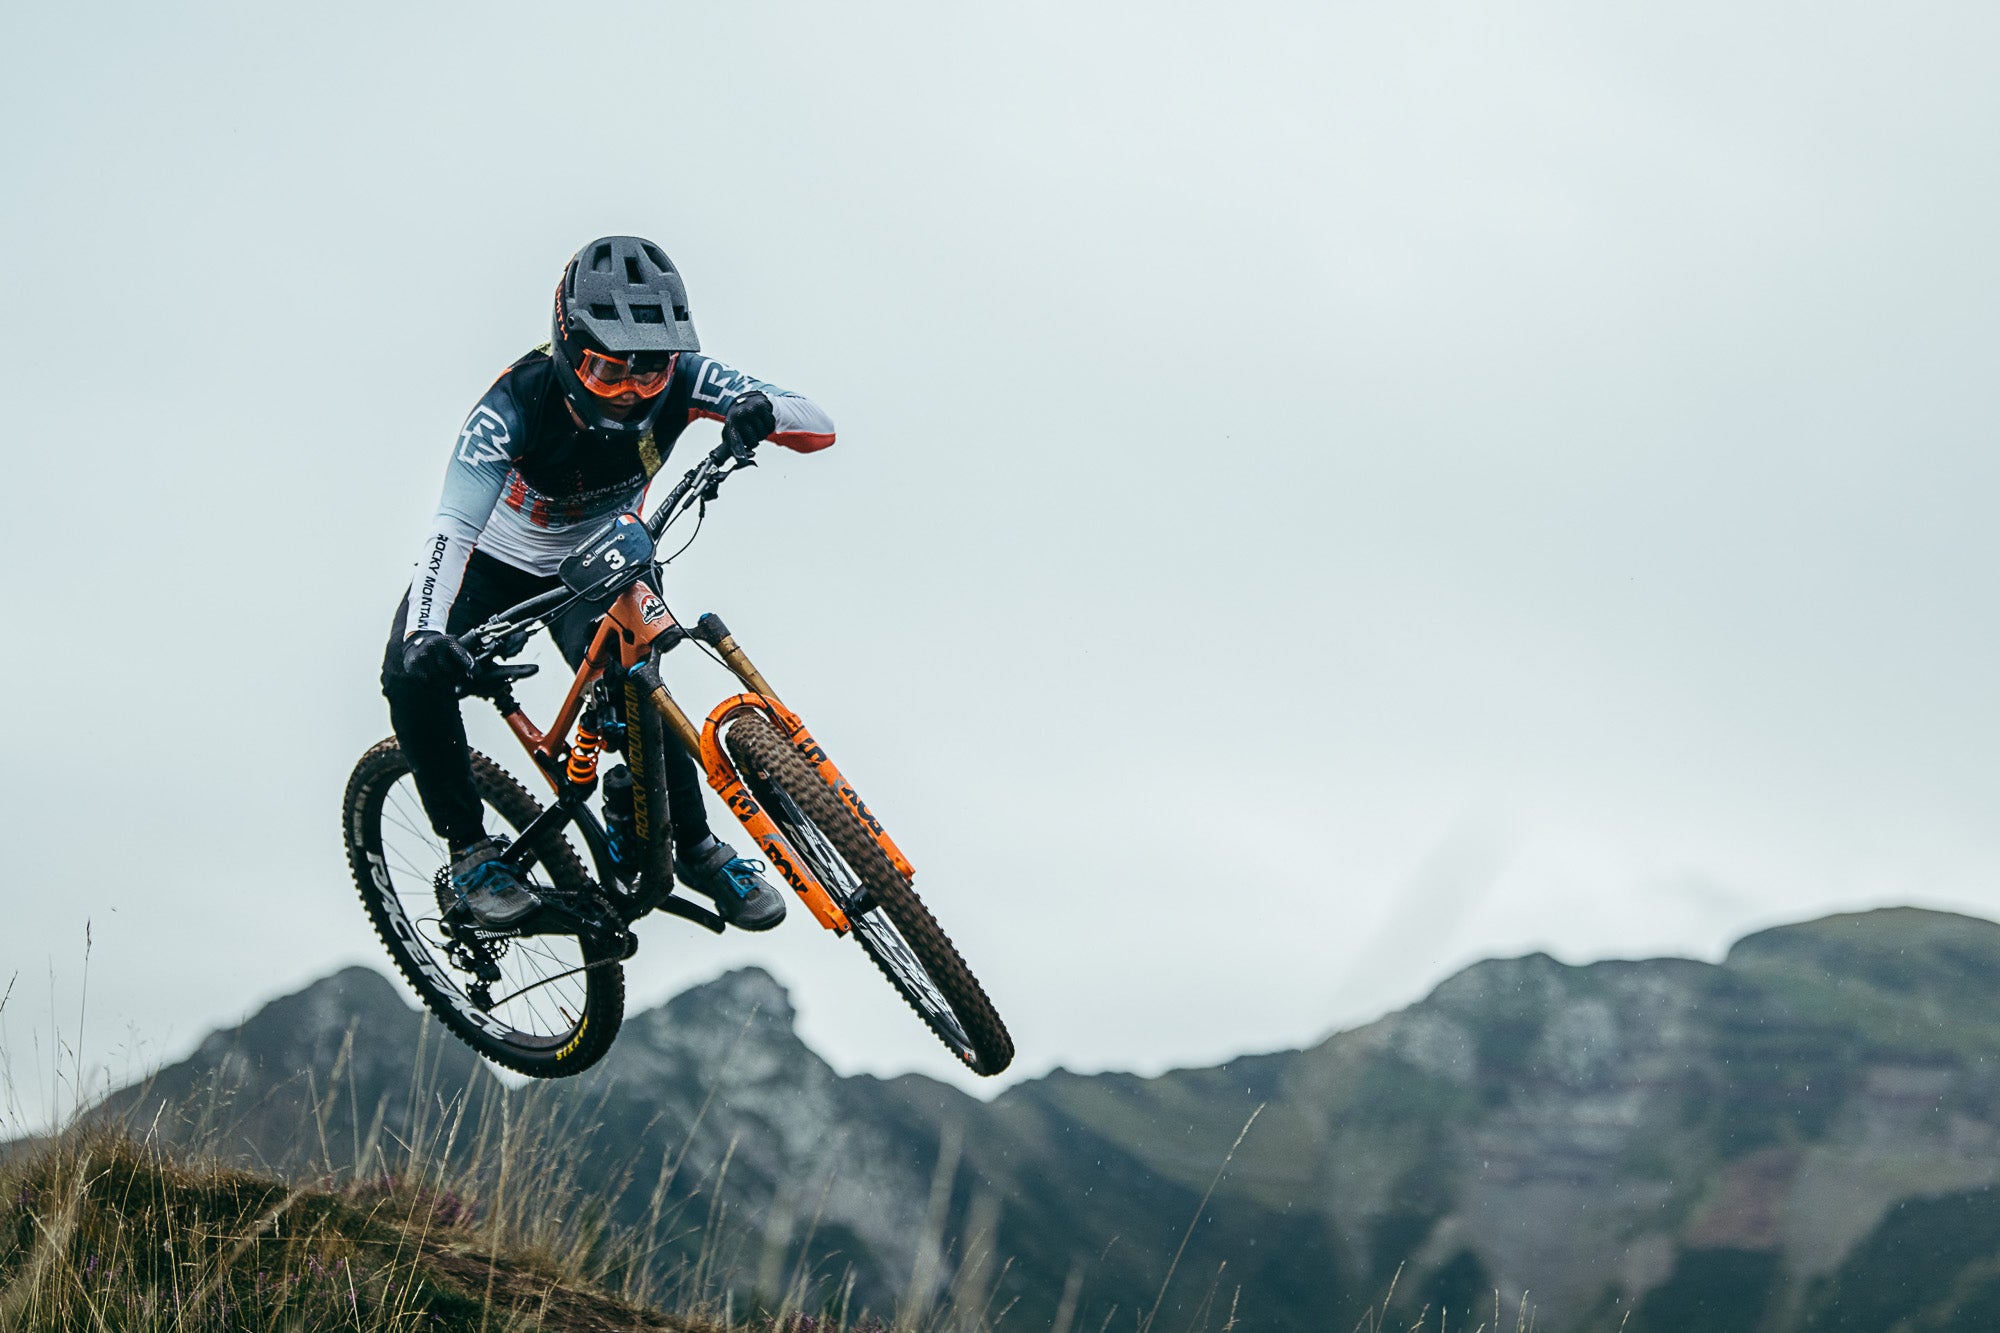 ALN rides her Altitude in the 5th Round of the 2021 EWS season